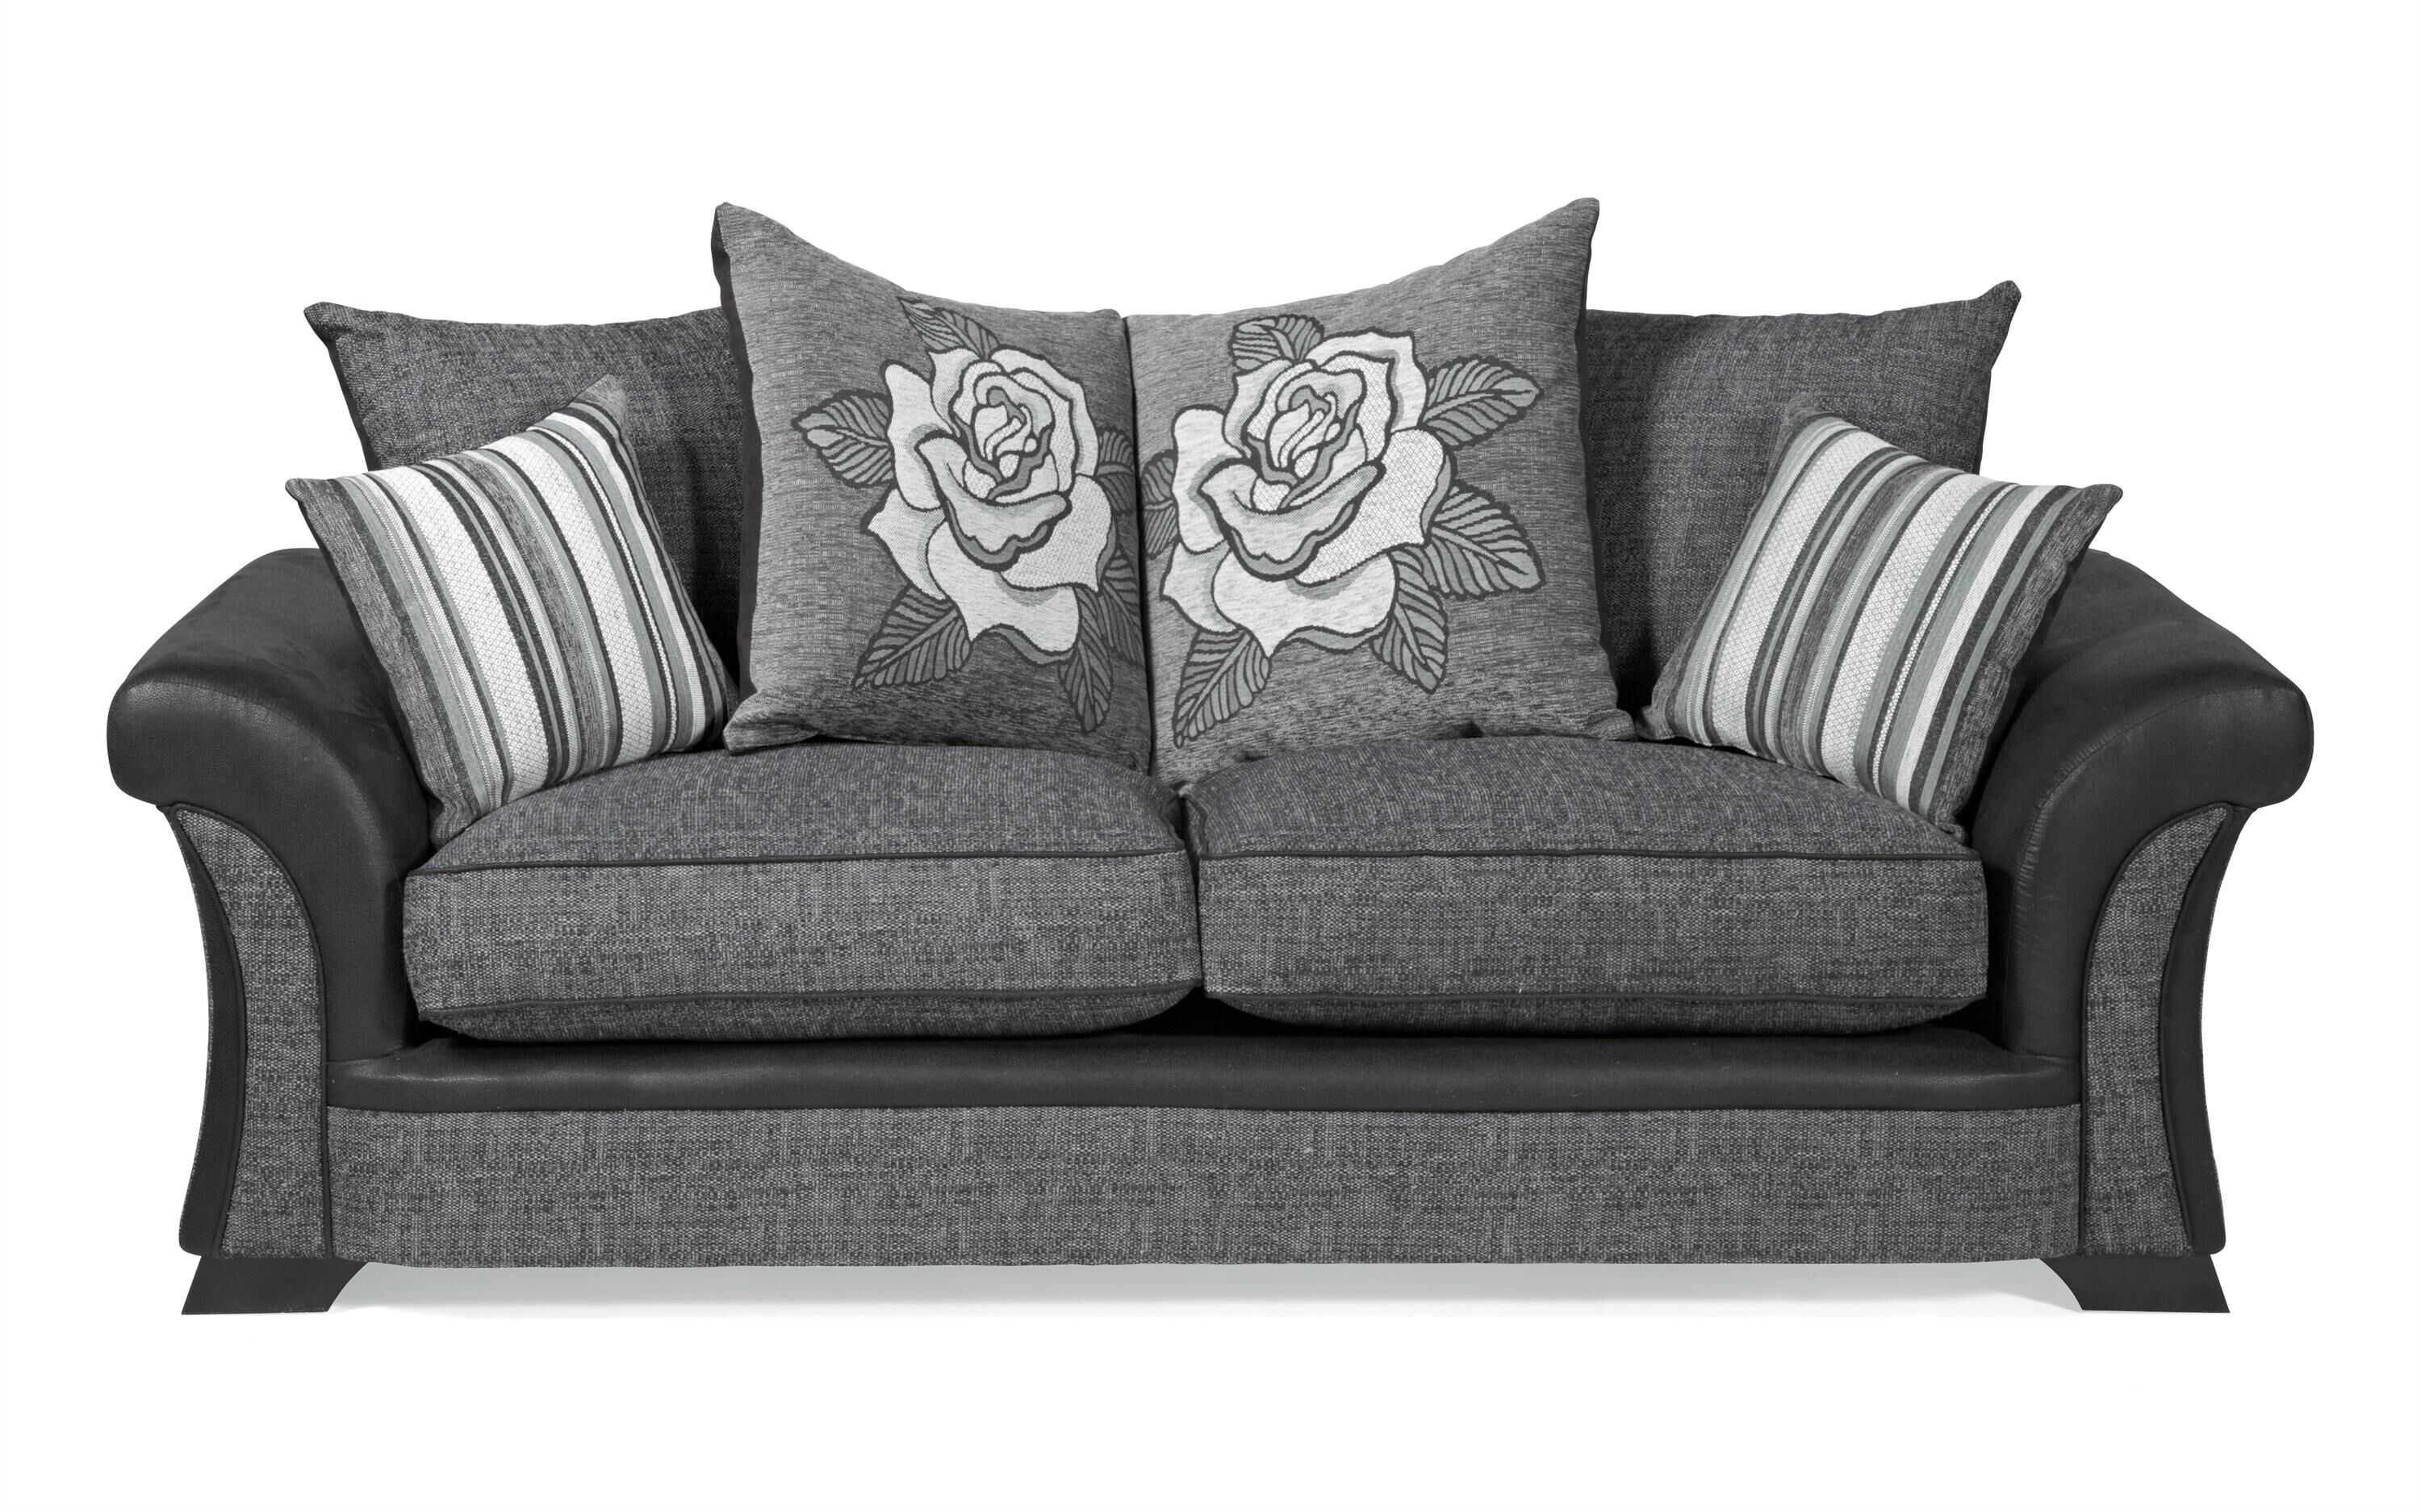 camille 3 seater sofa scatter back